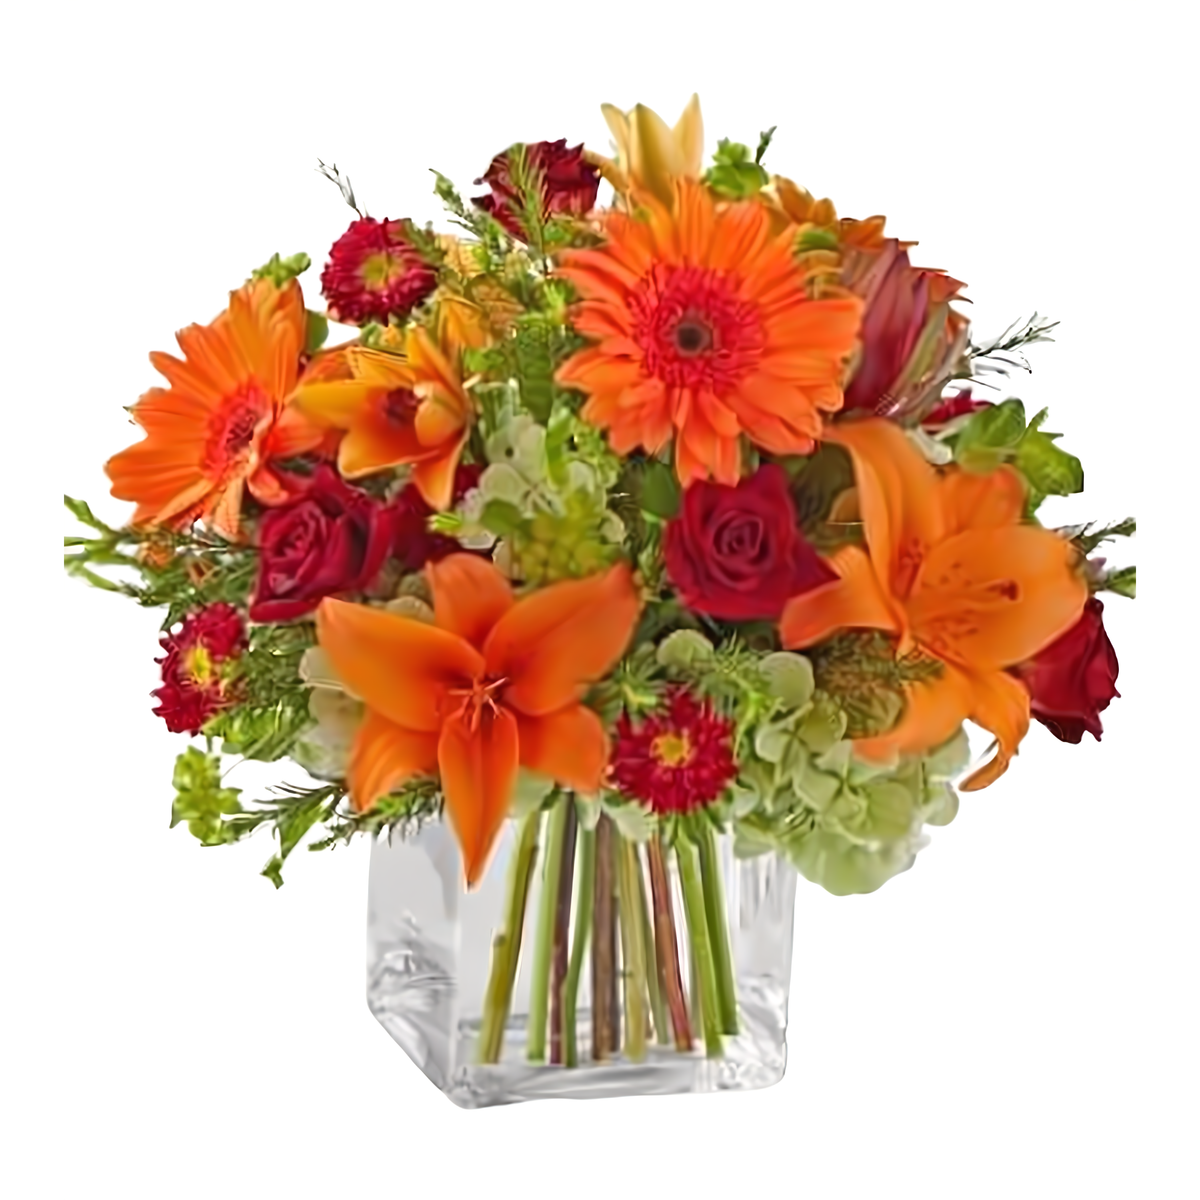 Manhattan Flower Delivery - Fabulous Fall Bouquet - Fall Collection